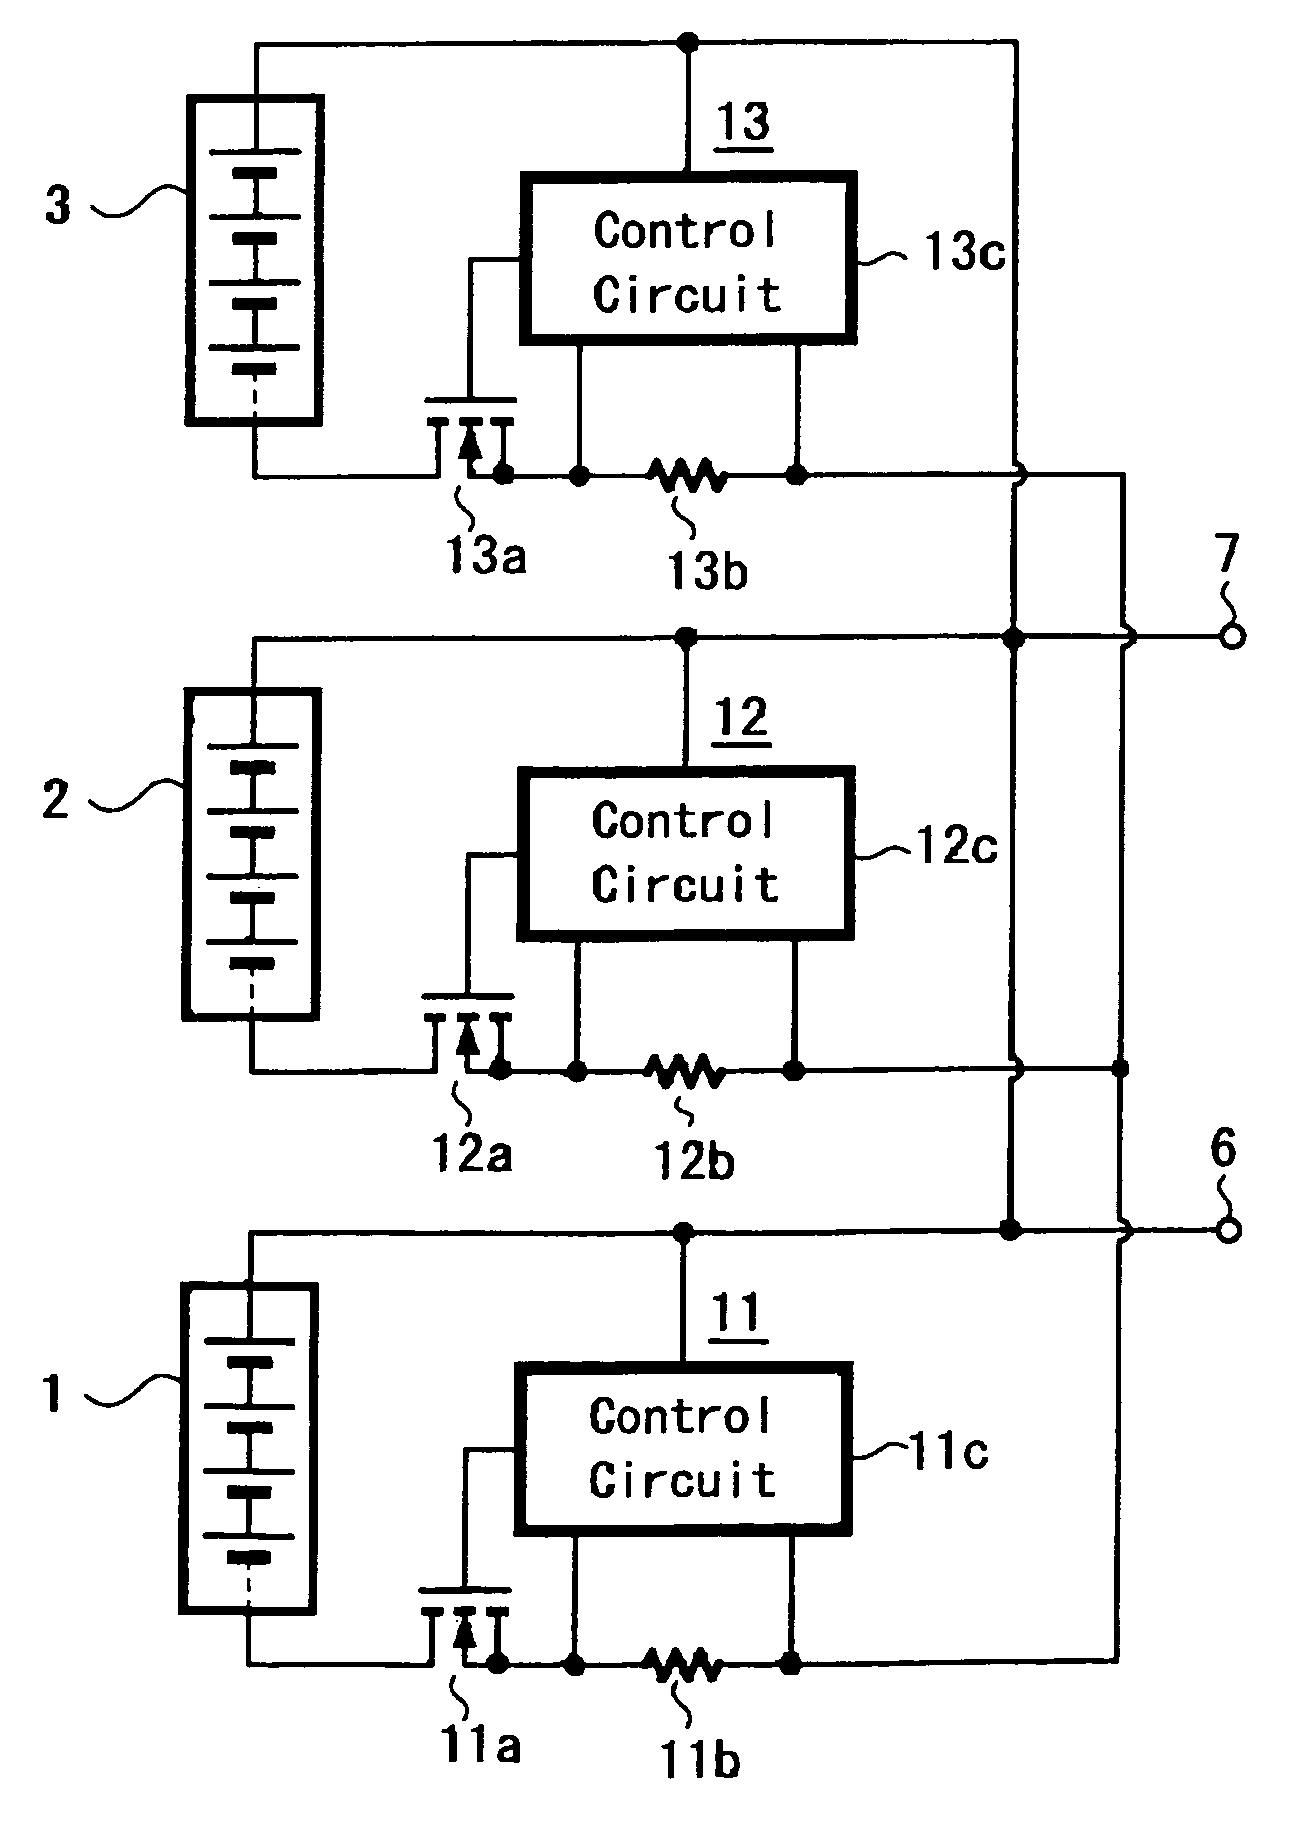 Power supply apparatus with transistor control for constant current between series-connected battery blocks